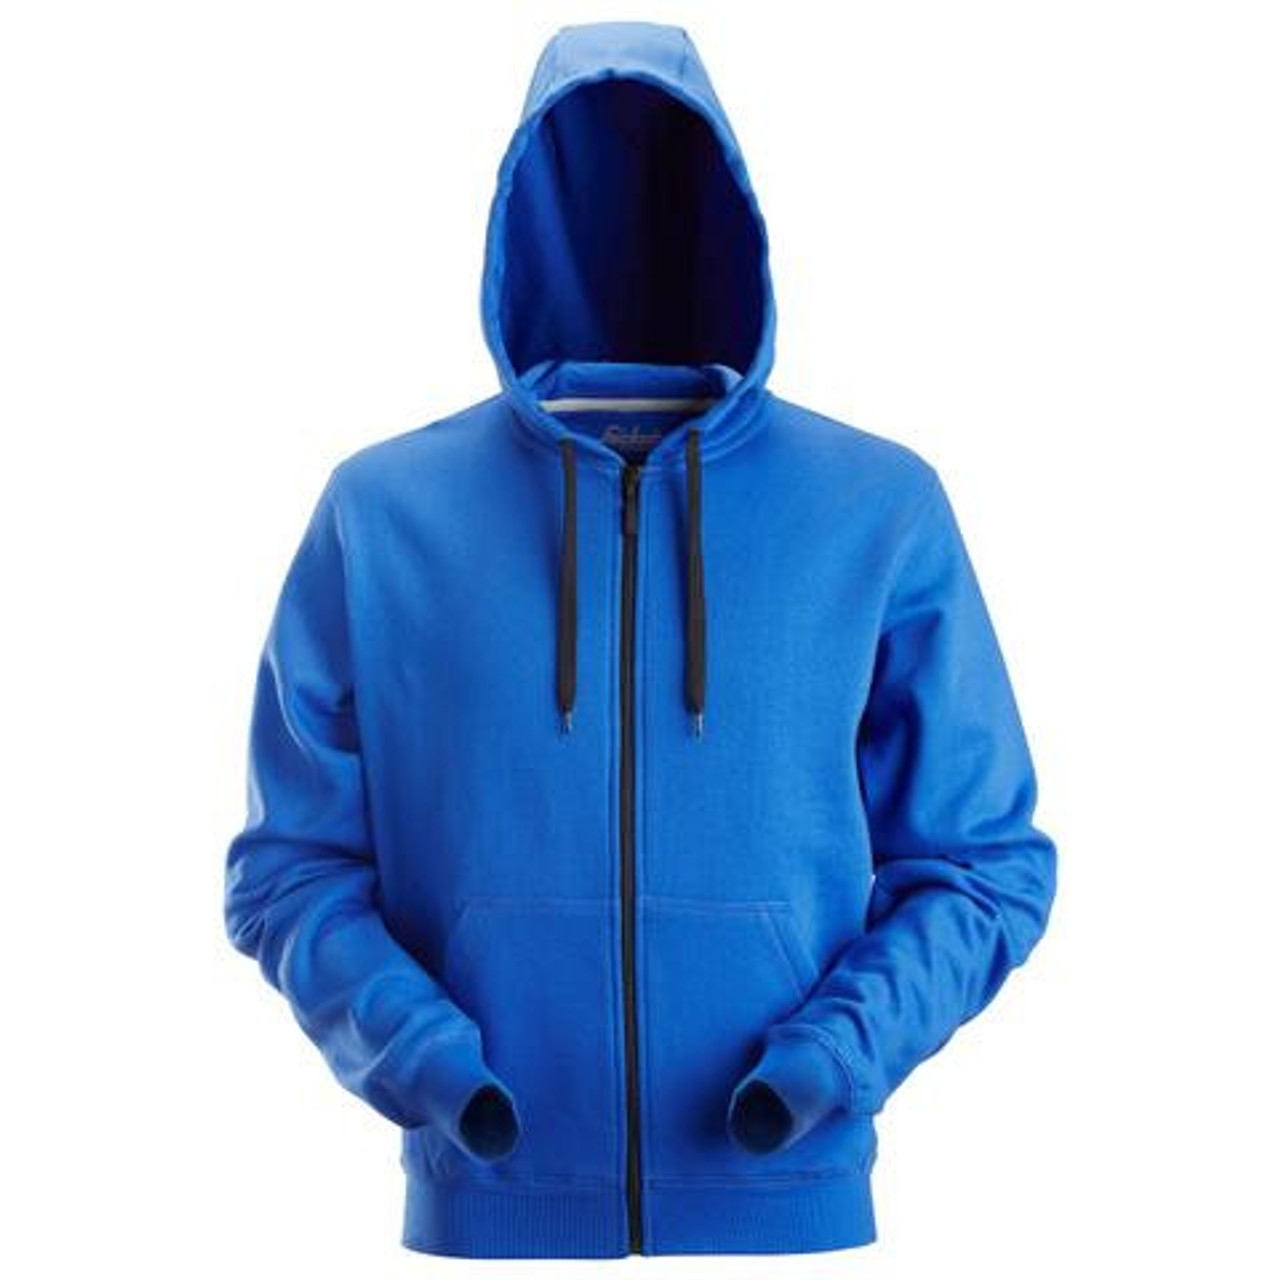 SNICKERS Hoodie  2801  with  for SNICKERS Hoodie  | 2801 Mens Blue Full Zip Hoodie in Cotton that have Full Zip  available in Australia and New Zealand